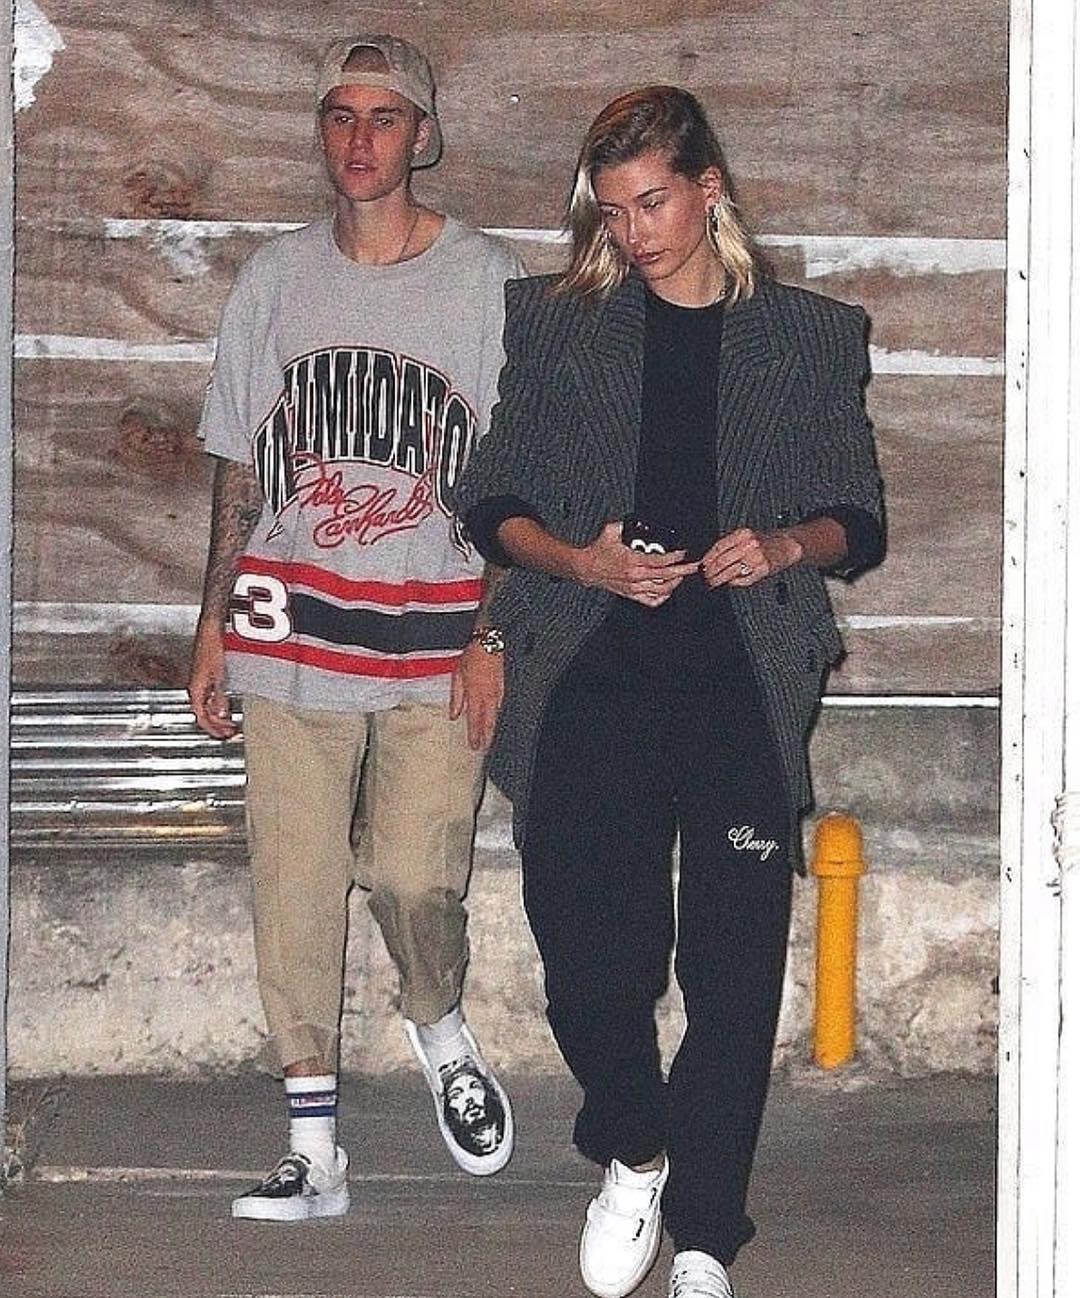 SPOTTED: Justin Bieber and Hailey Baldwin at the Saban Theater in Los Angeles